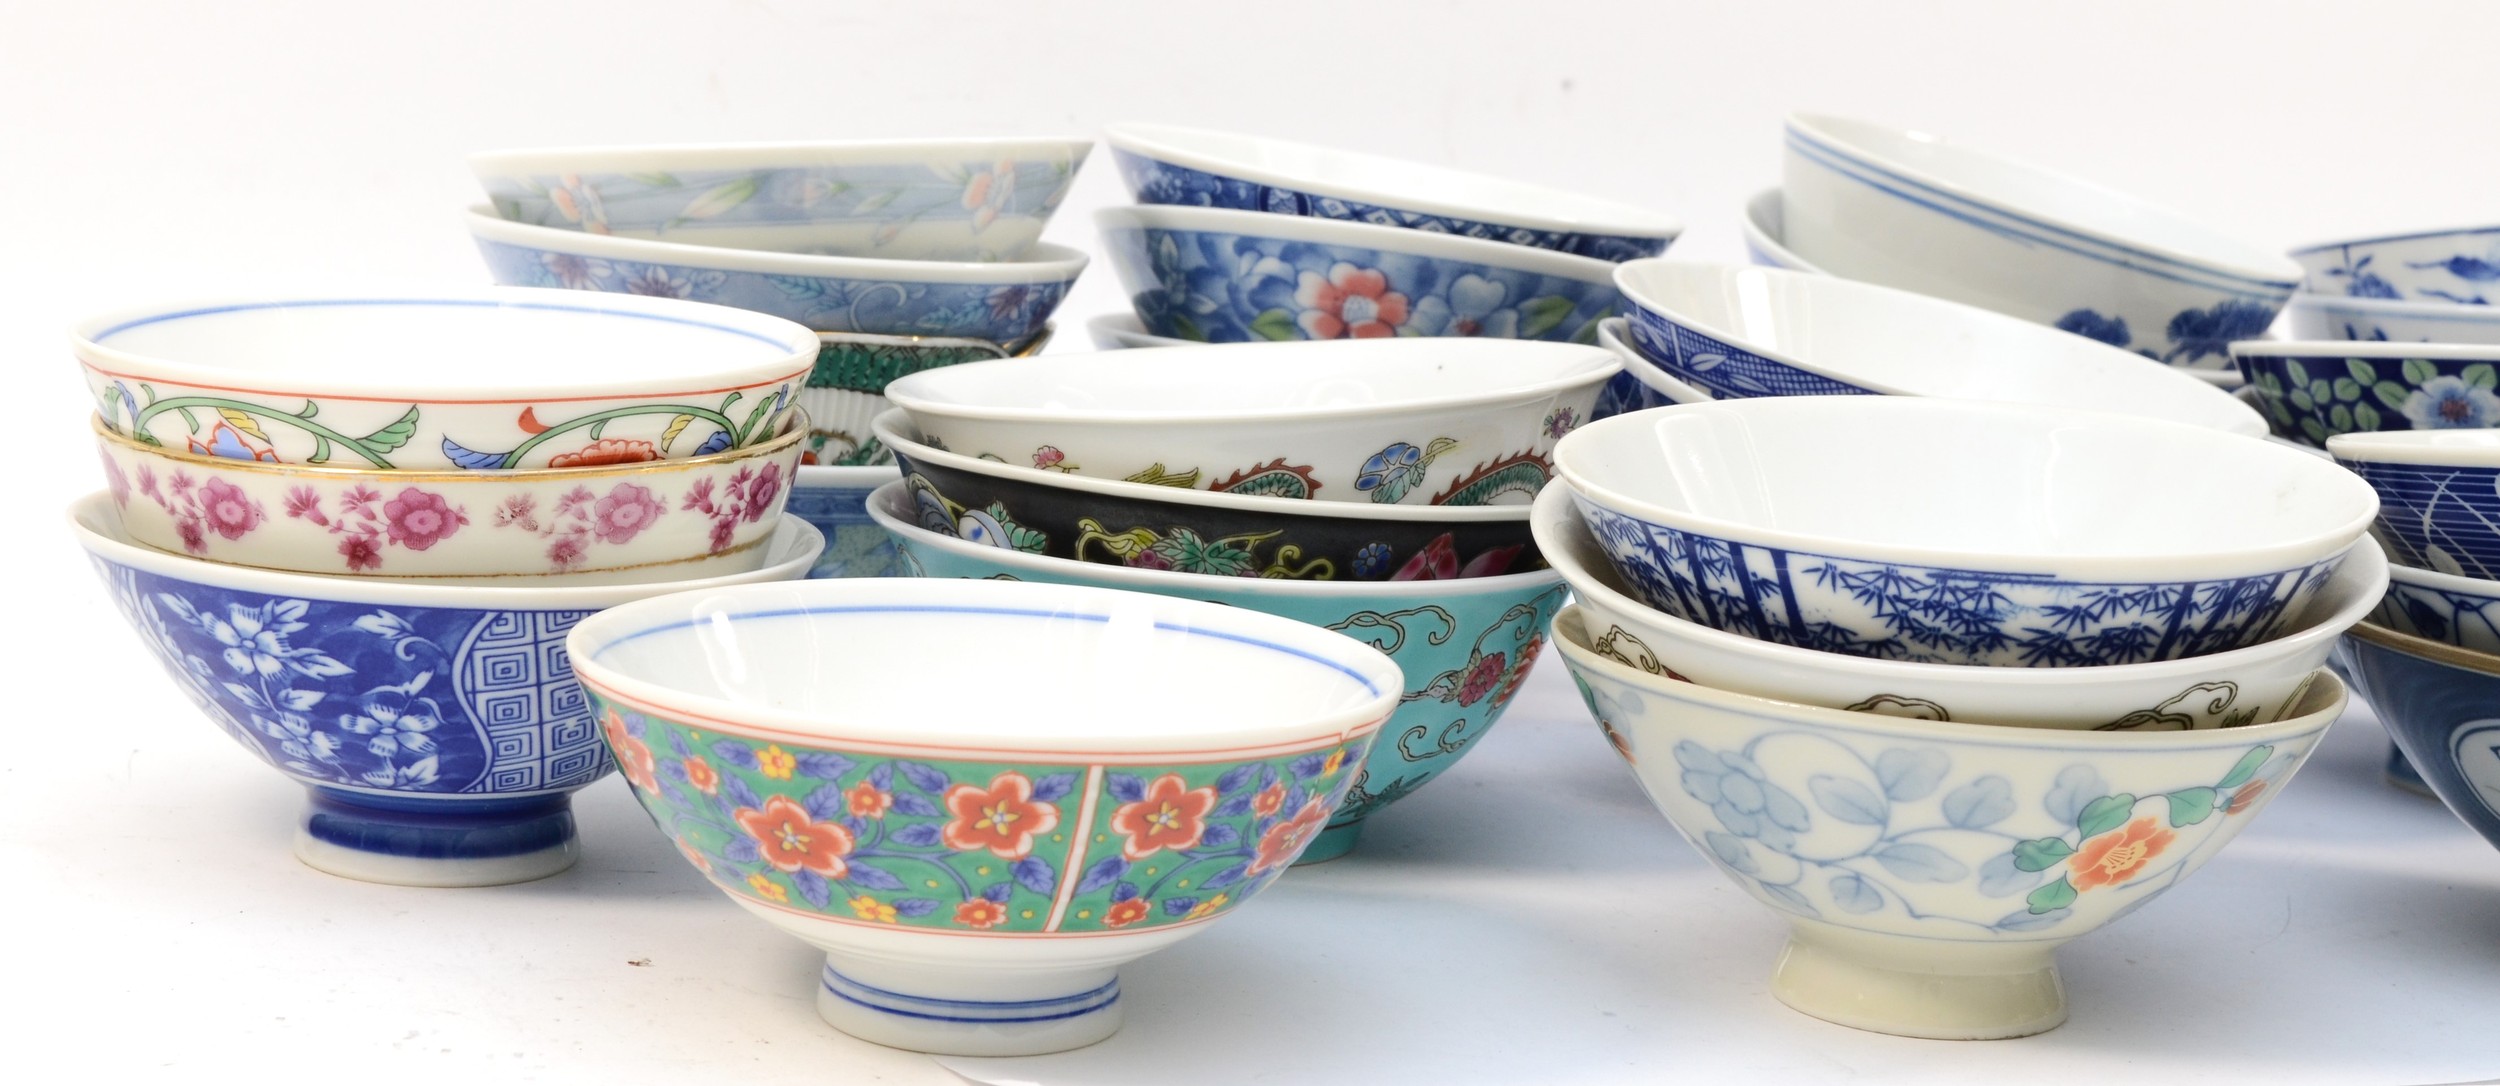 A collection of 20th century Chinese tea bowls. - Image 4 of 6